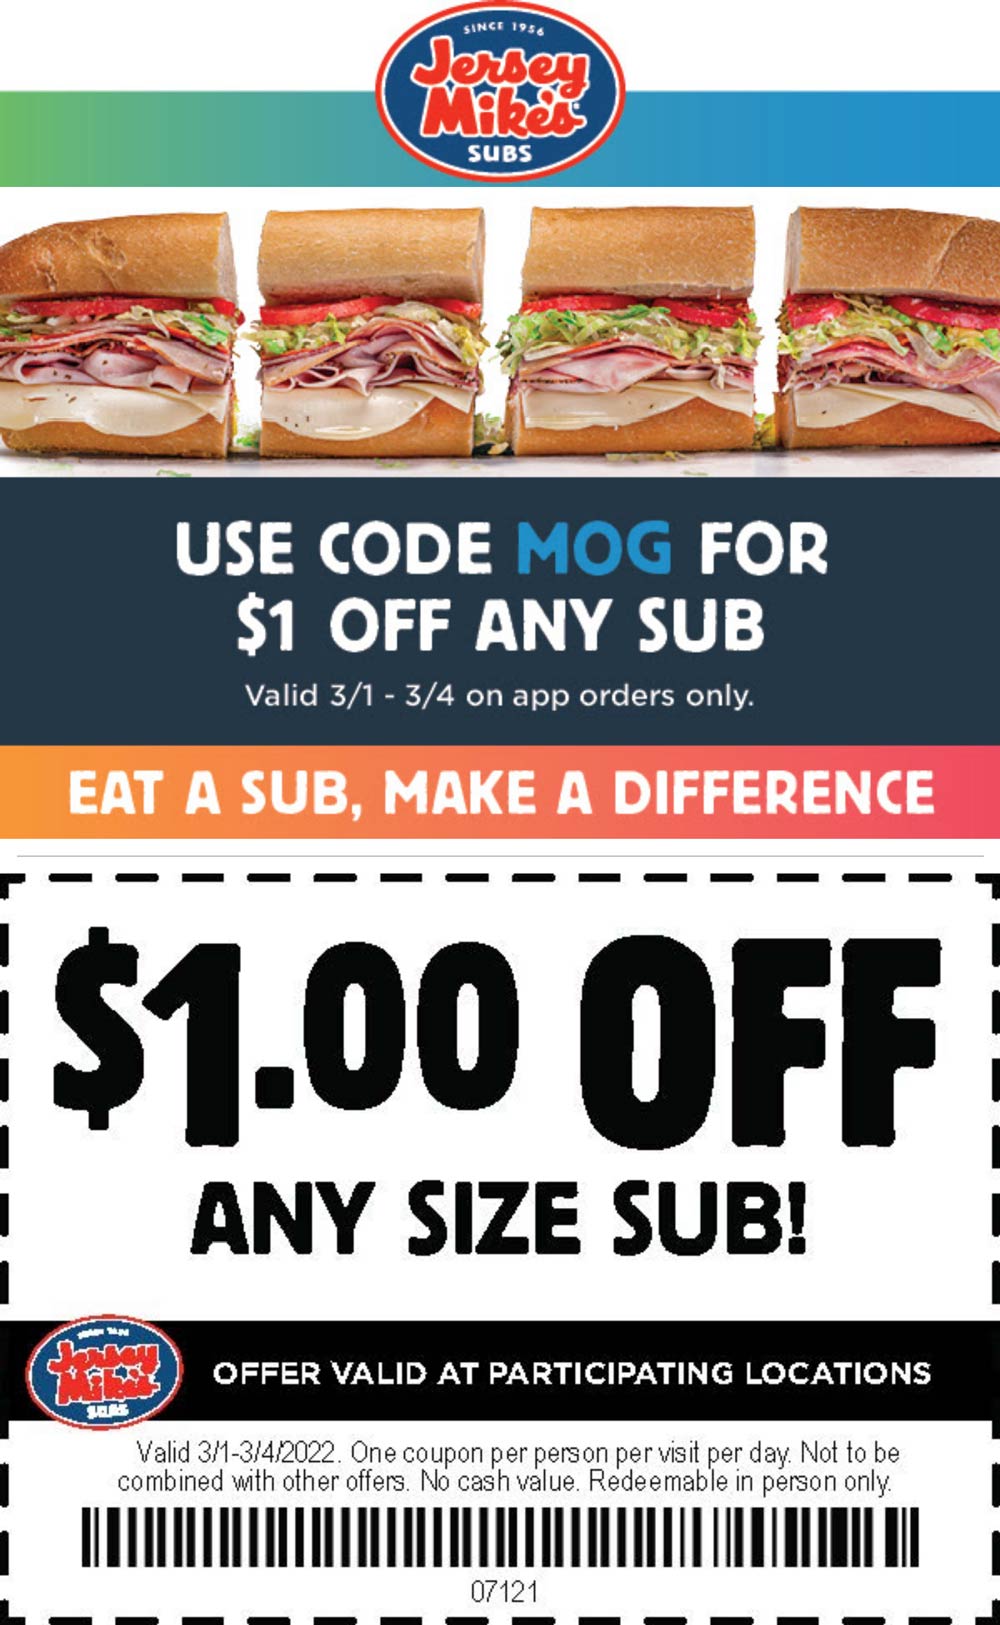 Jersey Mikes restaurants Coupon  $1 off any sub sandwich at Jersey Mikes via promo code MOG #jerseymikes 